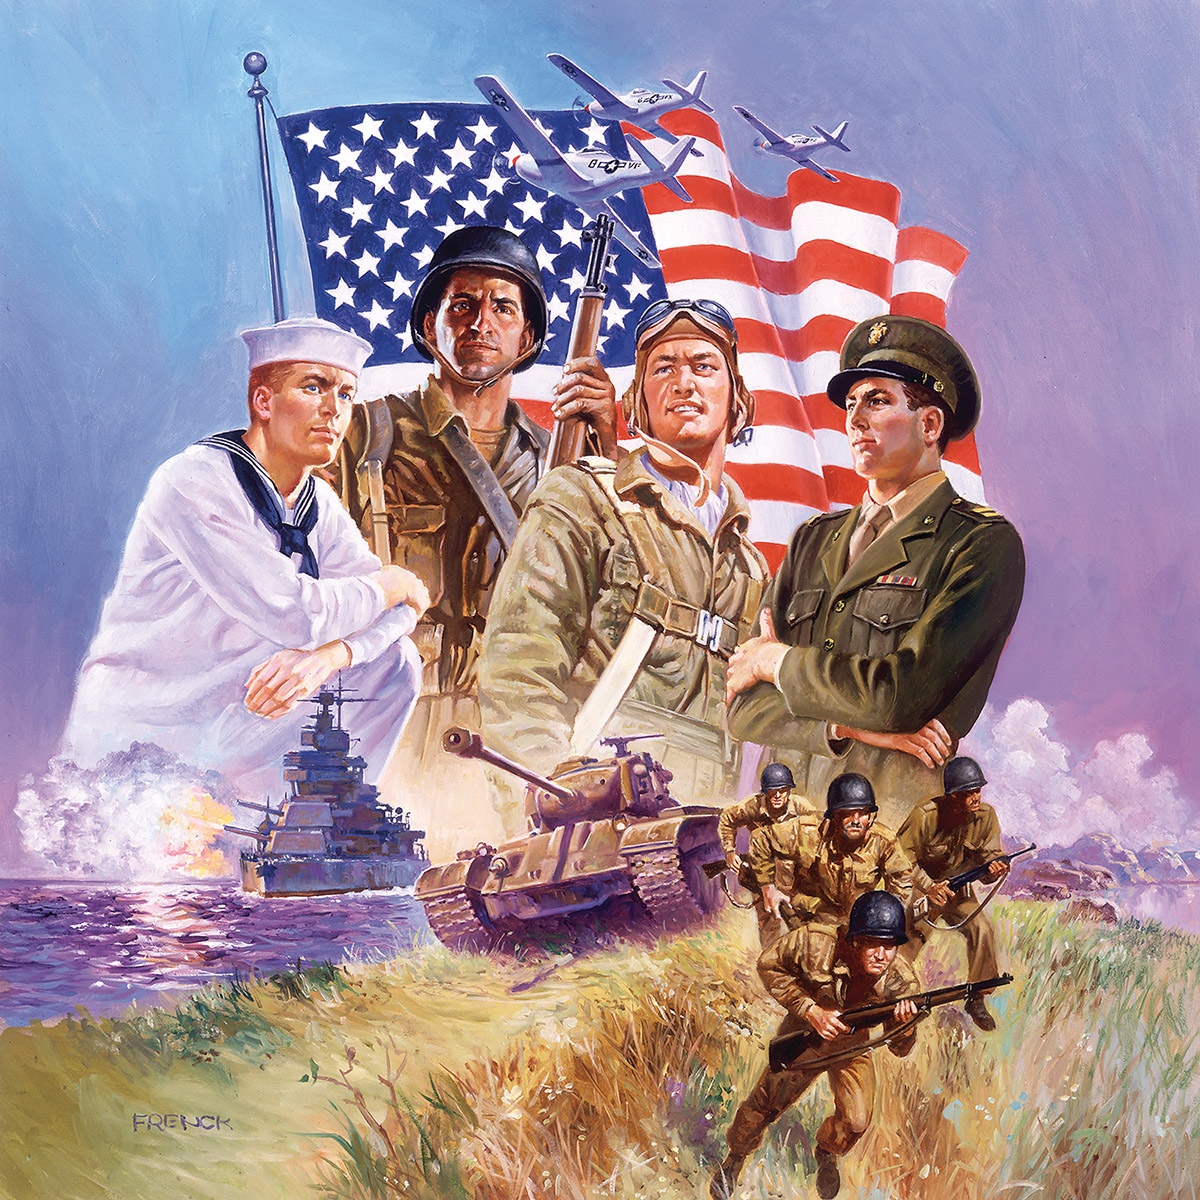 The Armed Forces Patriotic Jigsaw Puzzle